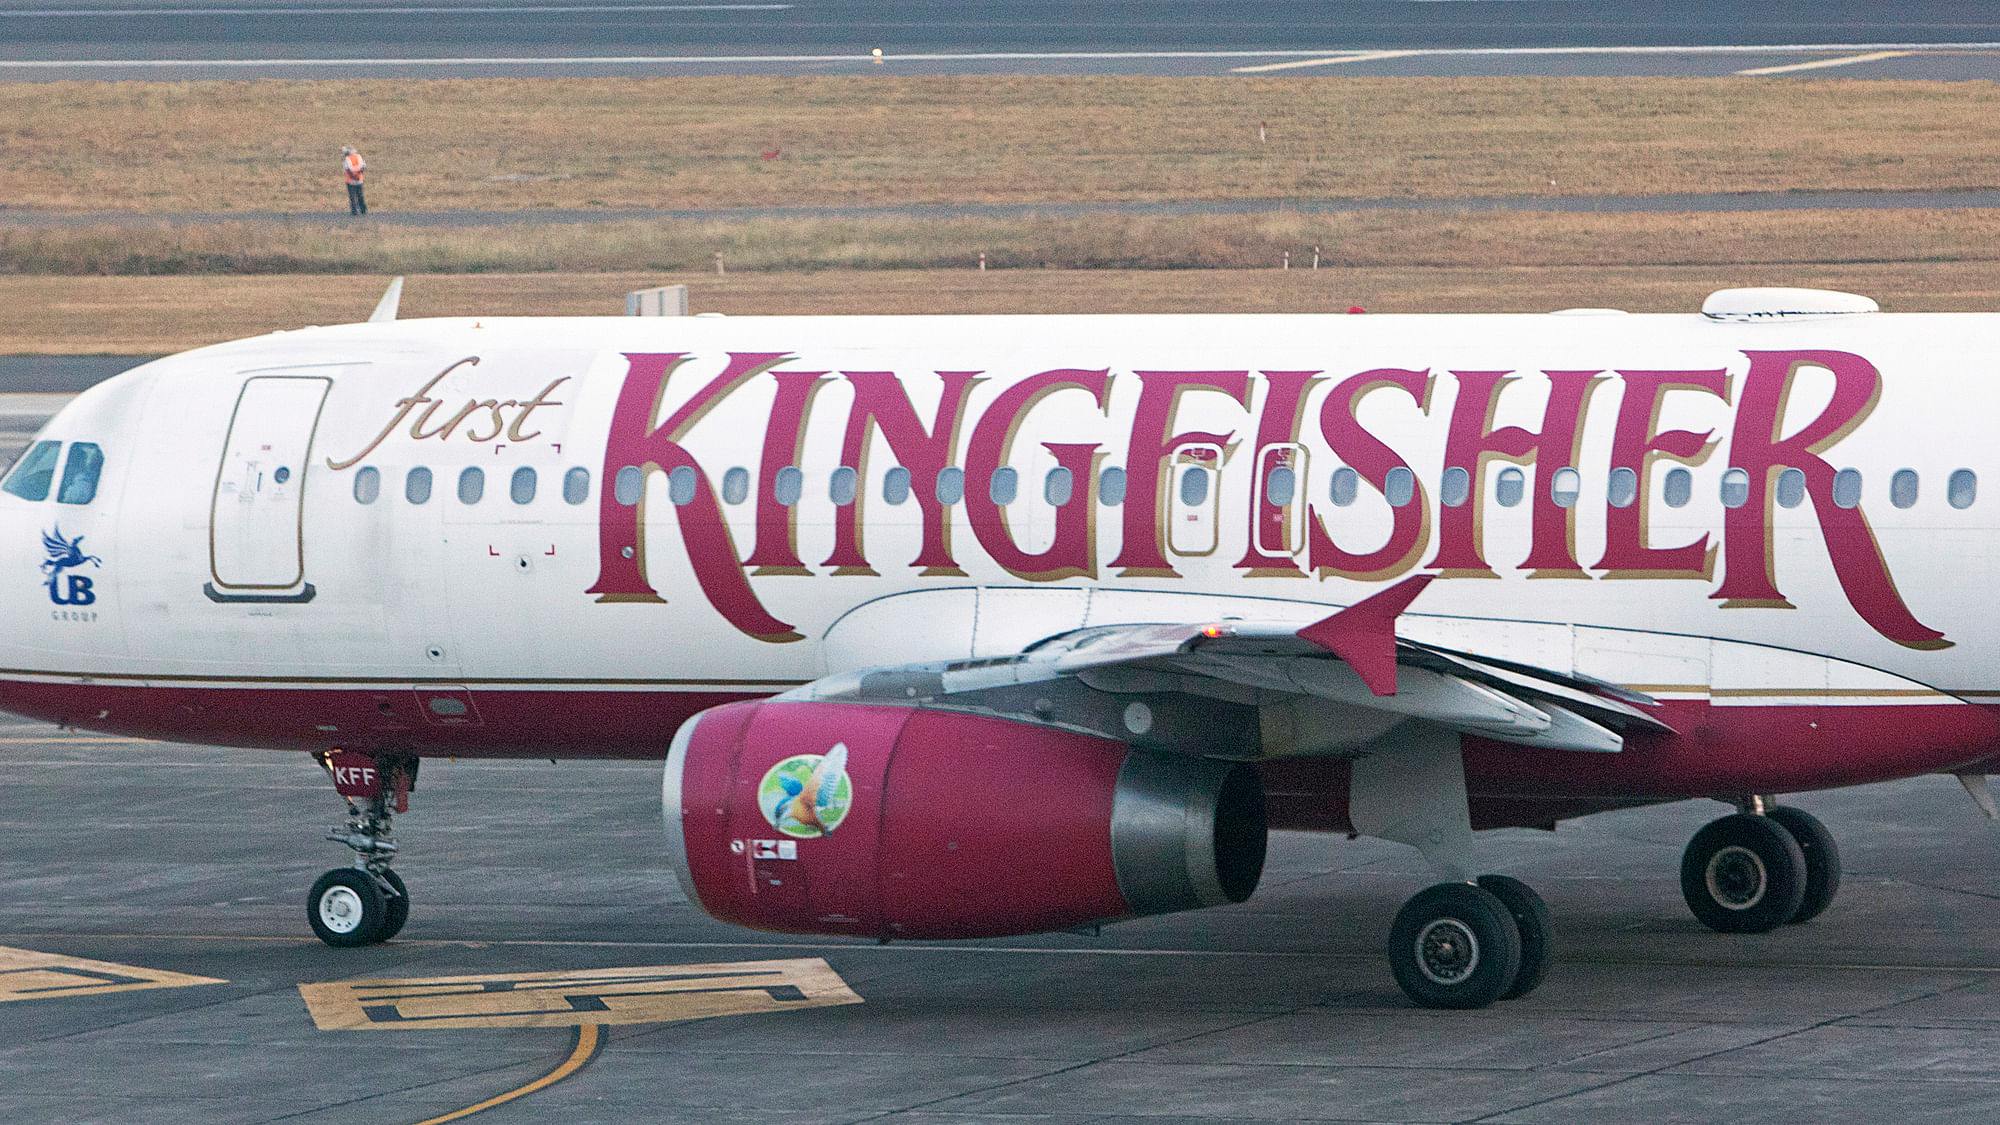 A Kingfisher Airlines aircraft taxis on the tarmac at Mumbai’s domestic airport, 21 February 2012. (Photo: Reuters)